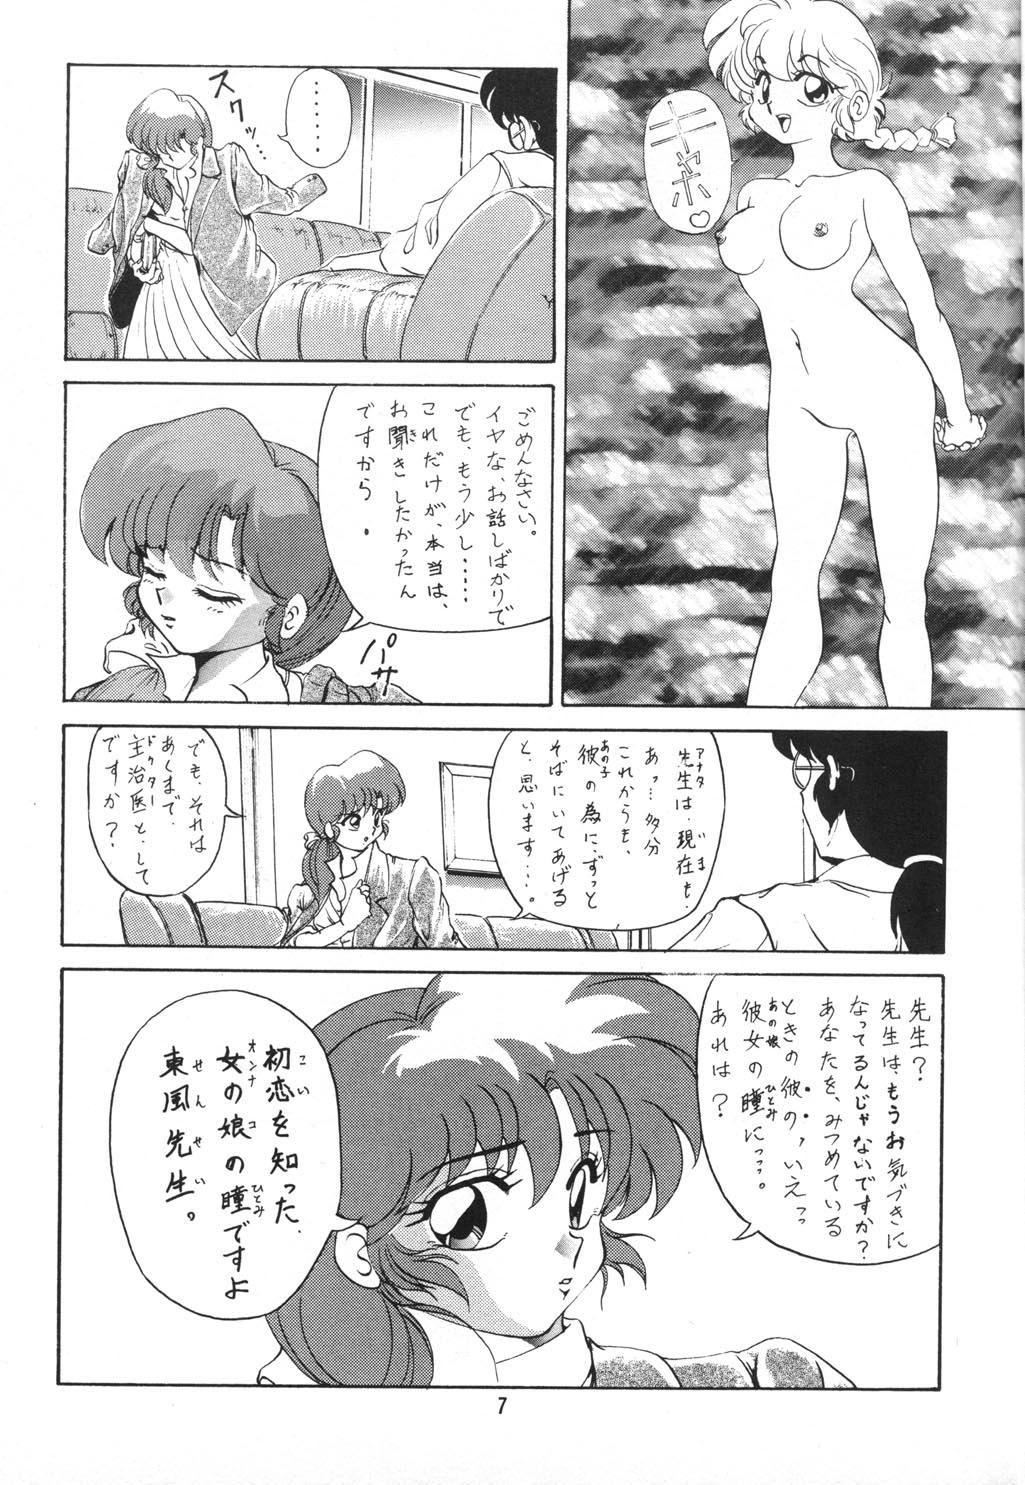 Ink Ambivalence 16 - Ranma 12 Huge Cock - Page 7